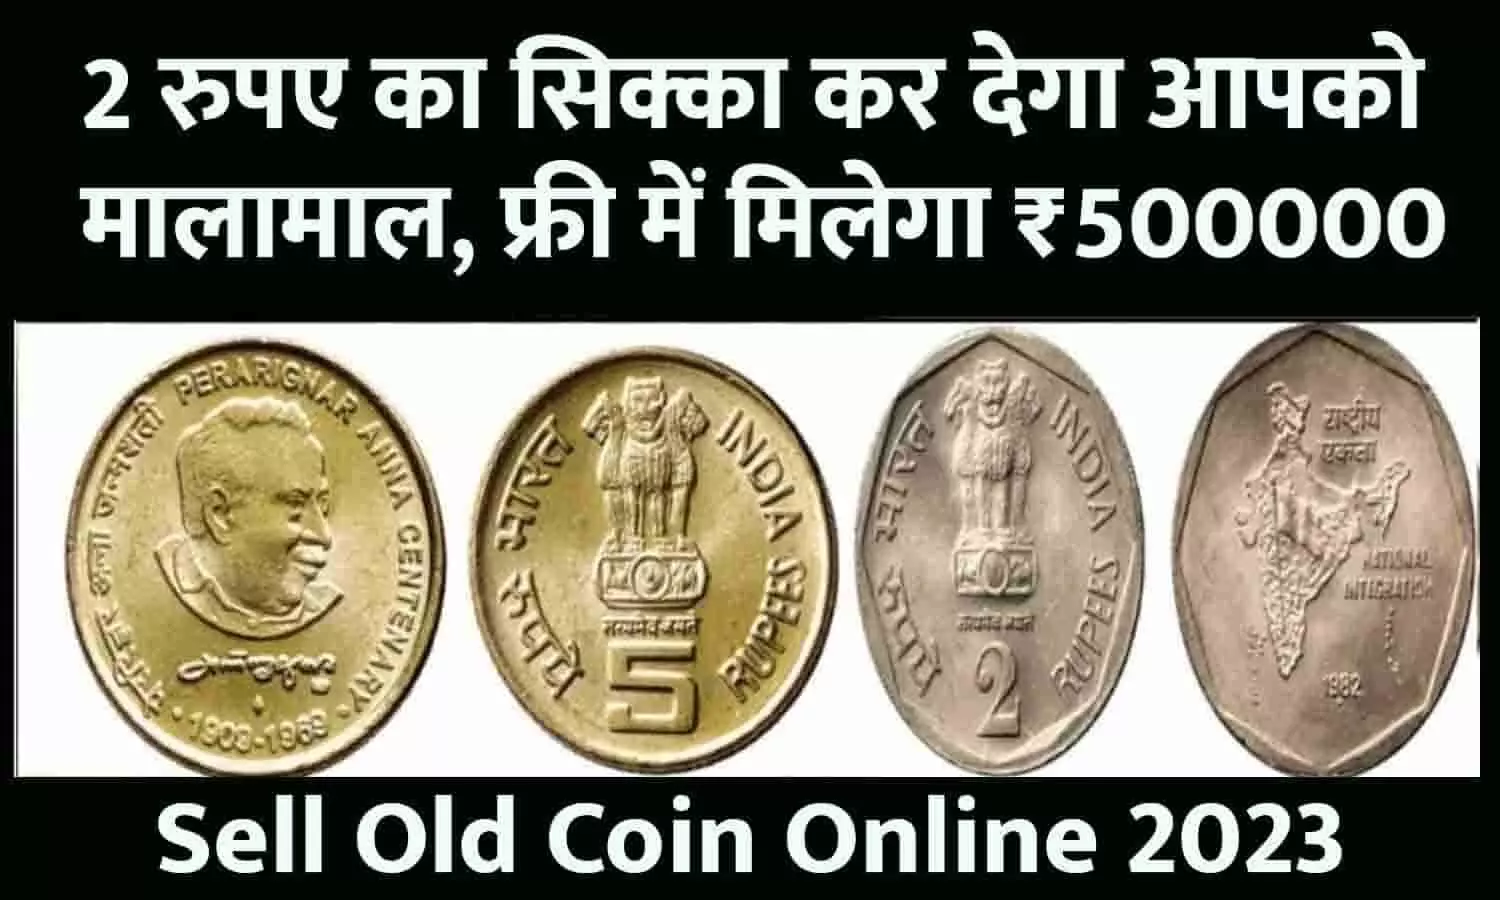 Sell Old Coin Online 2023